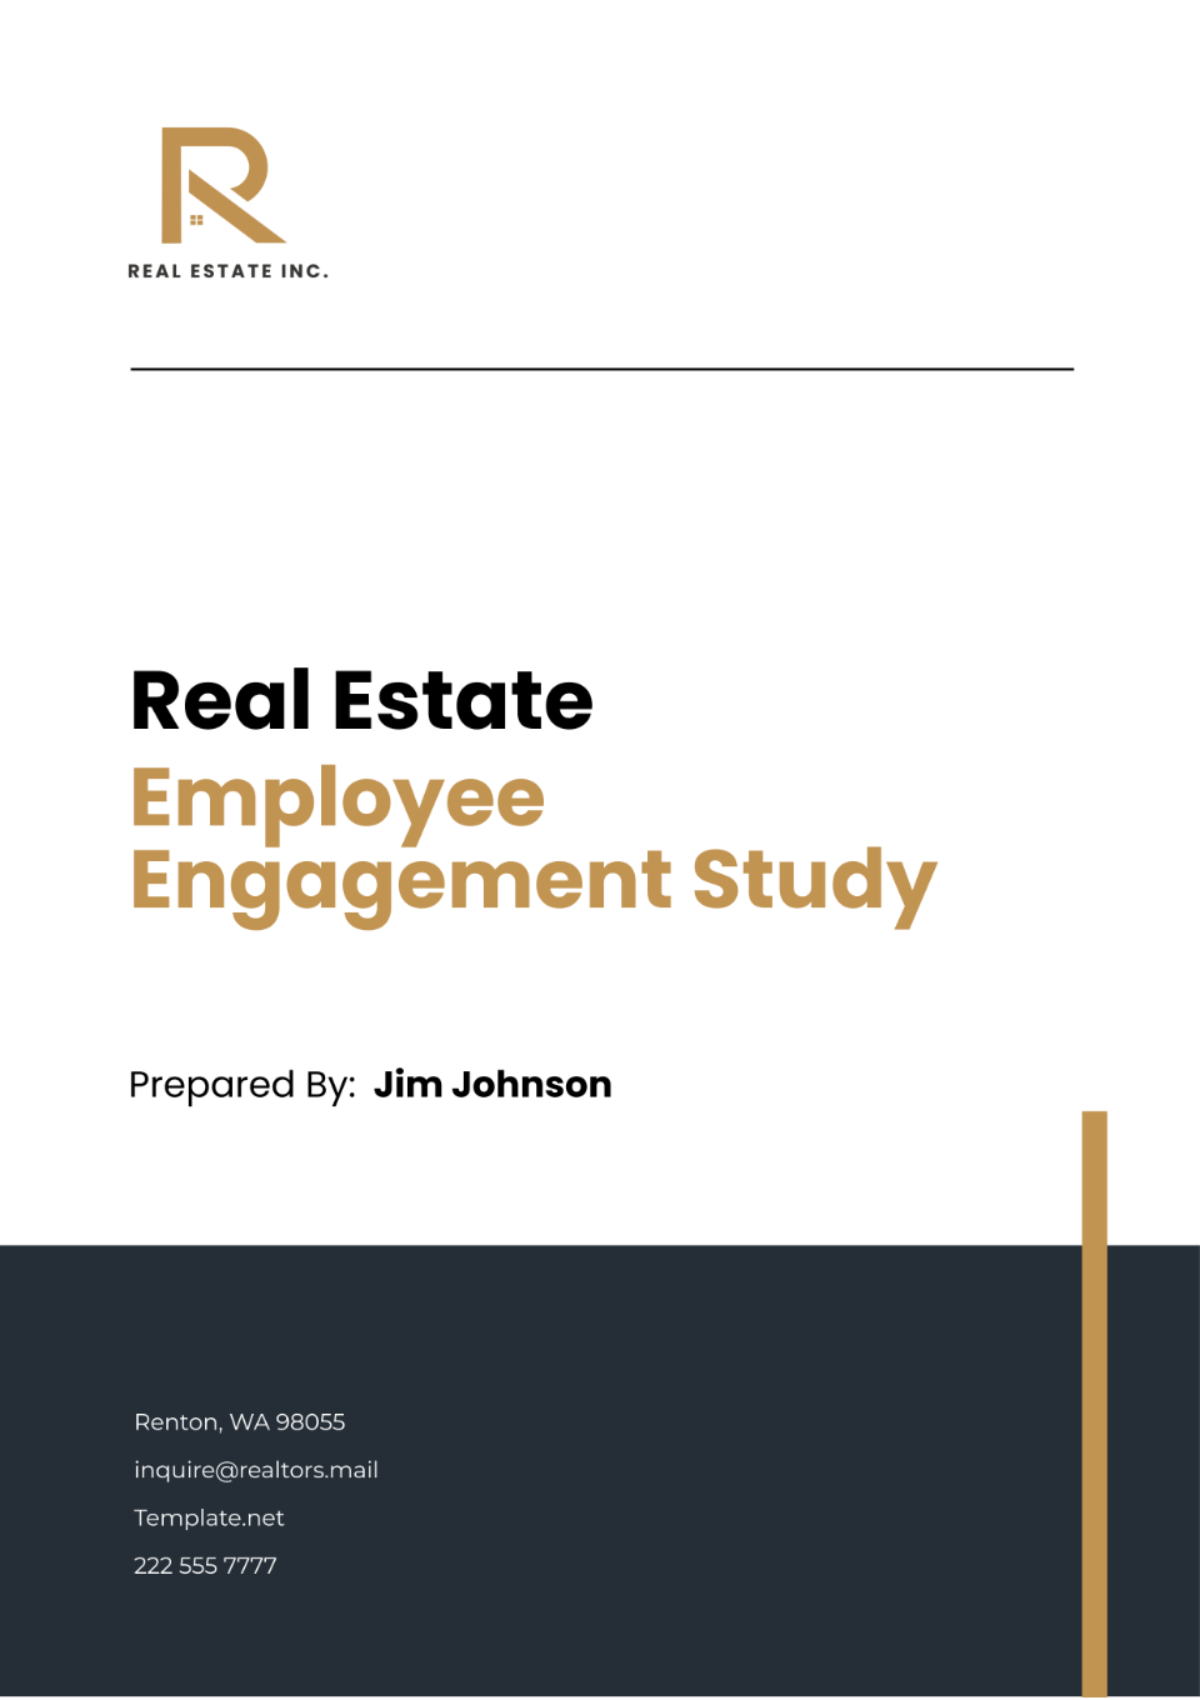 Real Estate Employee Engagement Study Template